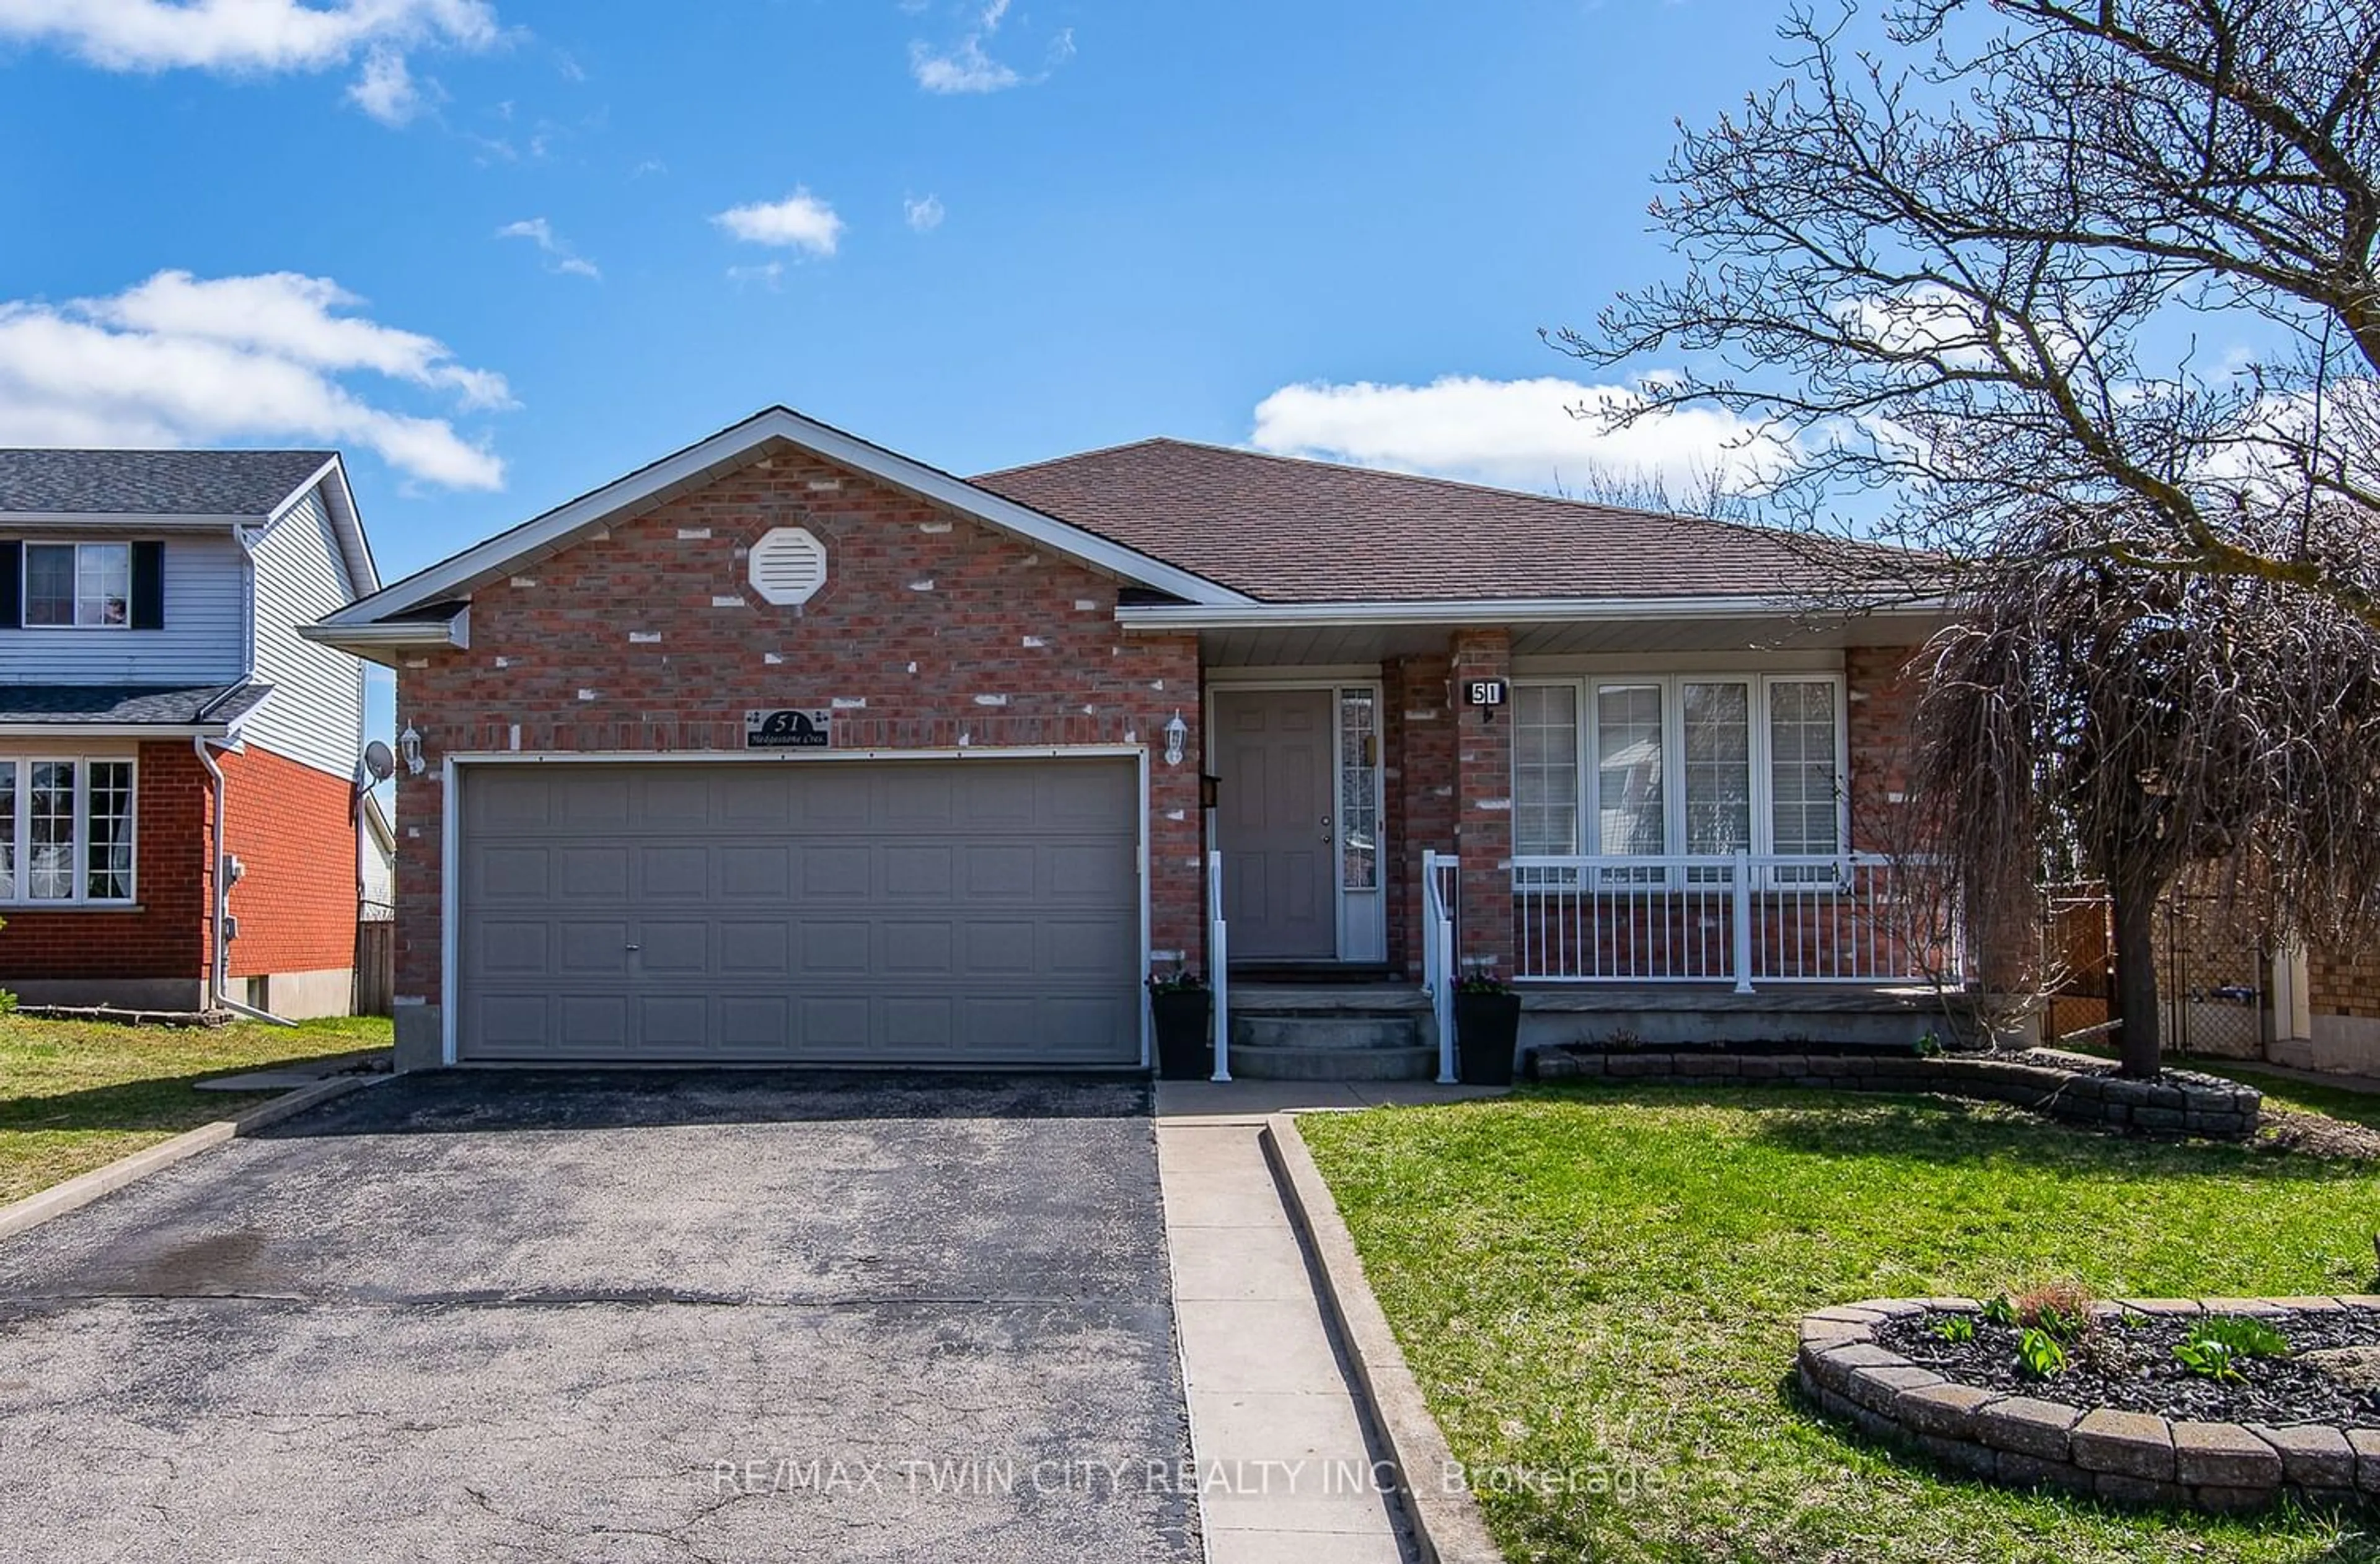 Home with brick exterior material for 51 Hedgestone Cres, Kitchener Ontario N2E 3K5